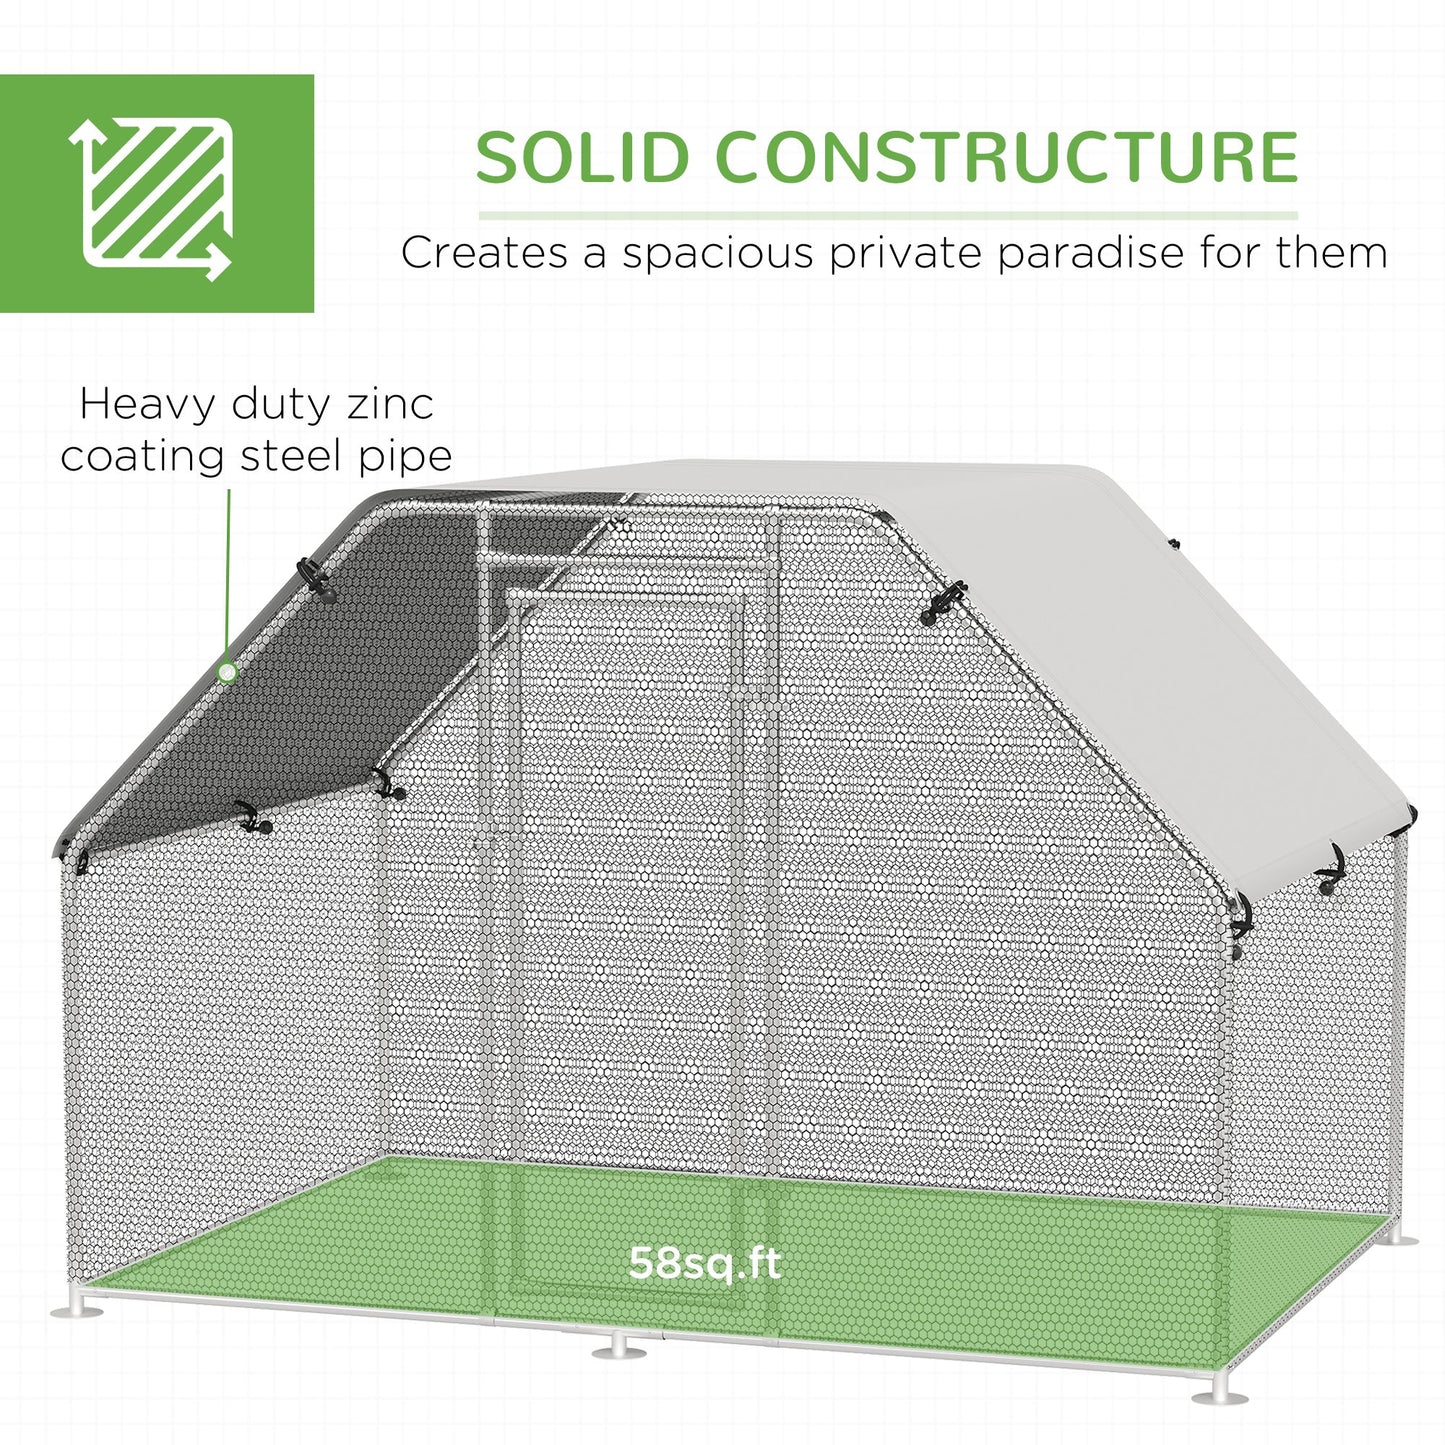 -PawHut Galvanized Metal Chicken Coop with Cover, 9' W x 6' D x 6.5' H Walk-In Pen Run - Outdoor Style Company